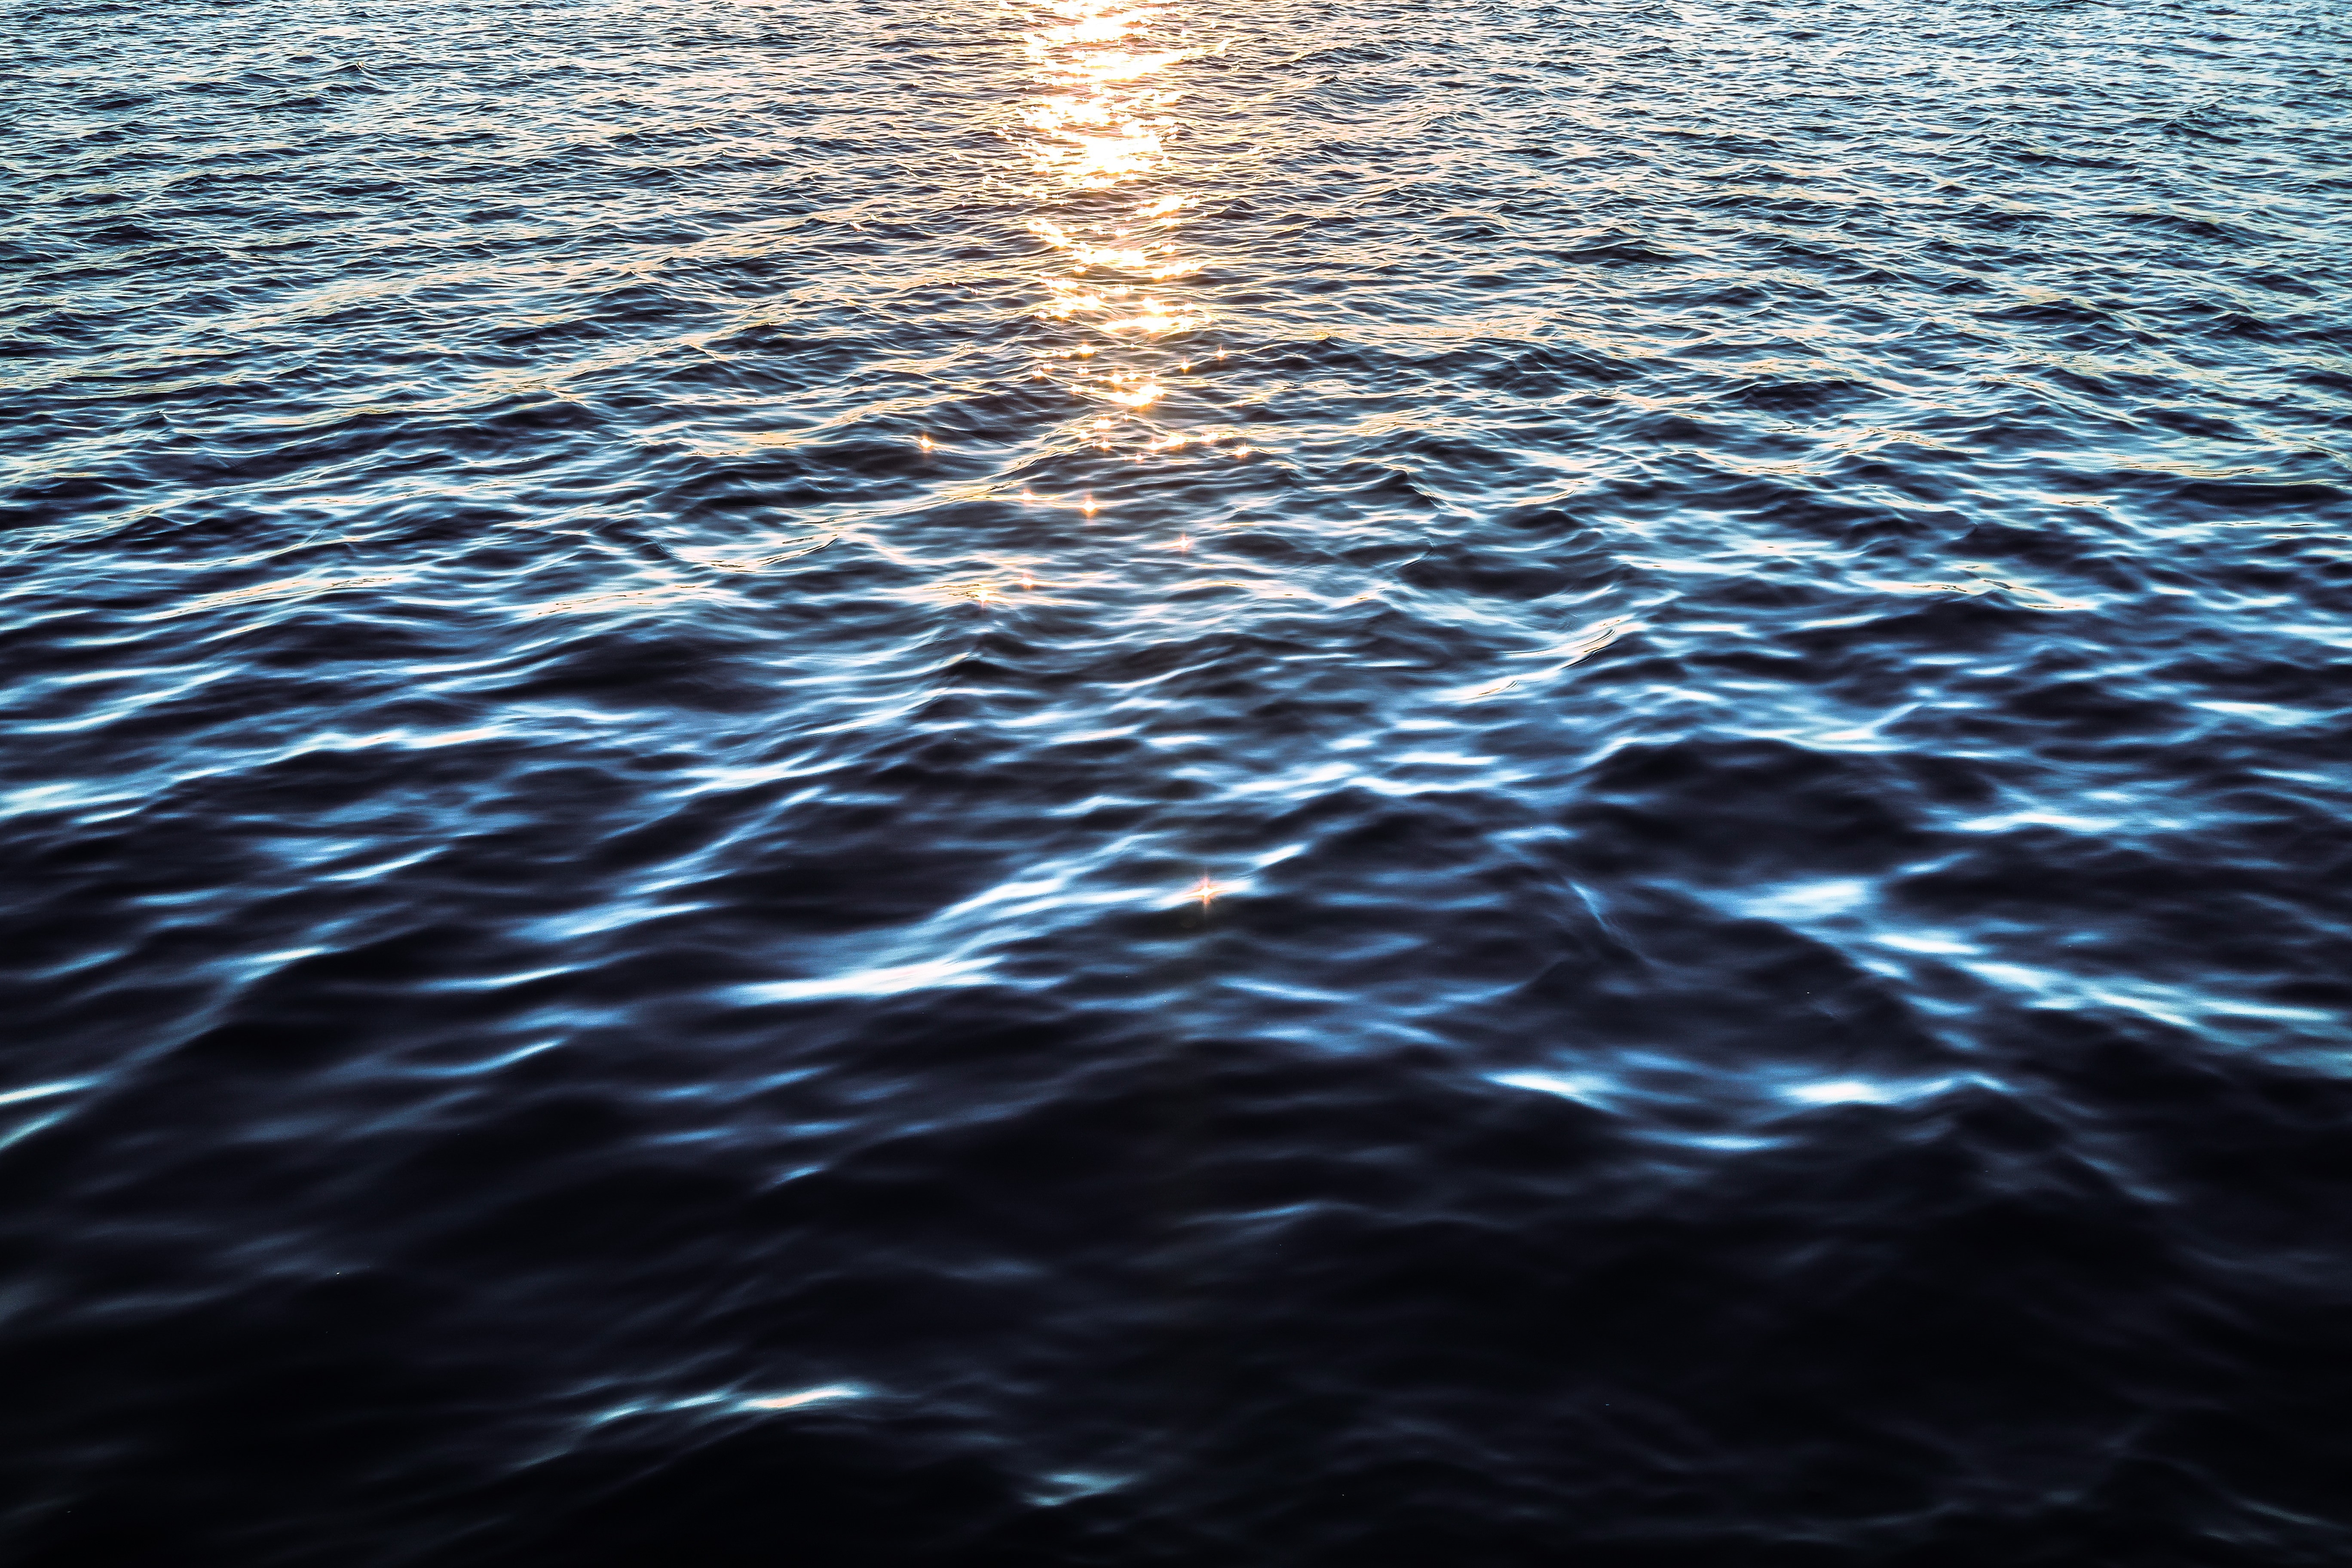 The sun reflects on the sea surface